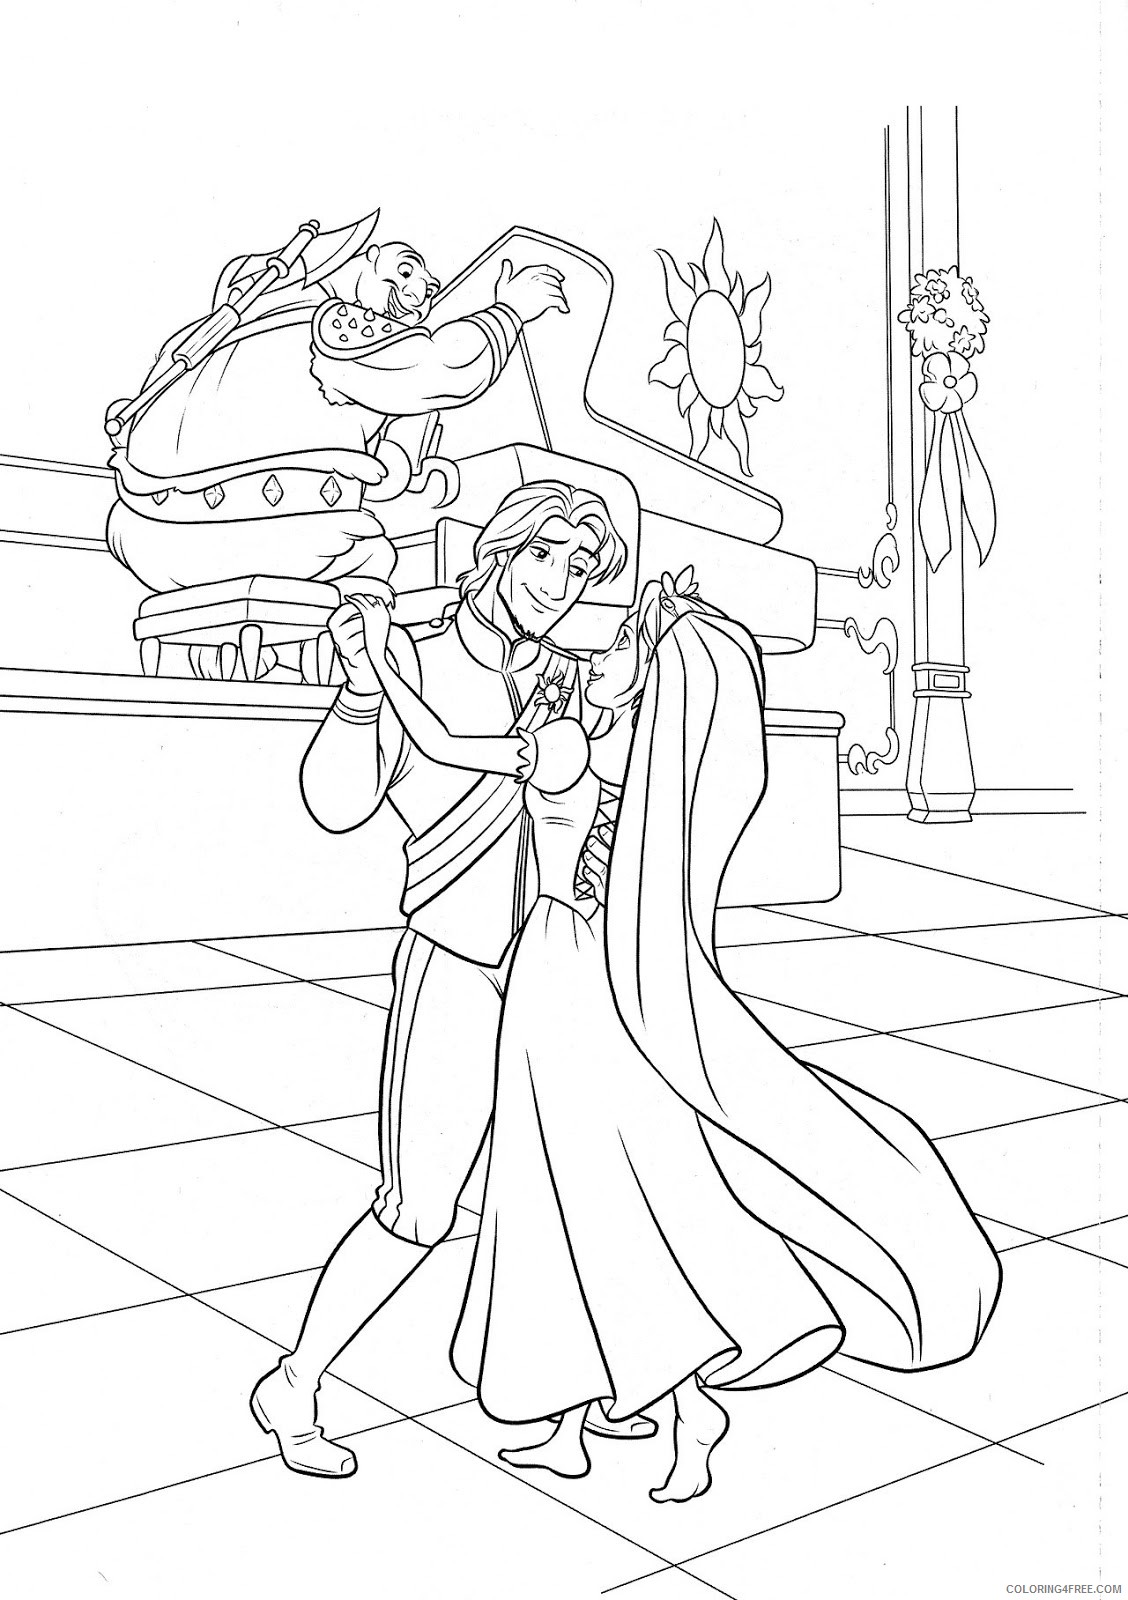 Rapunzel Coloring Pages Cartoons Picture of Rapunzel to Printable 2020 5298 Coloring4free